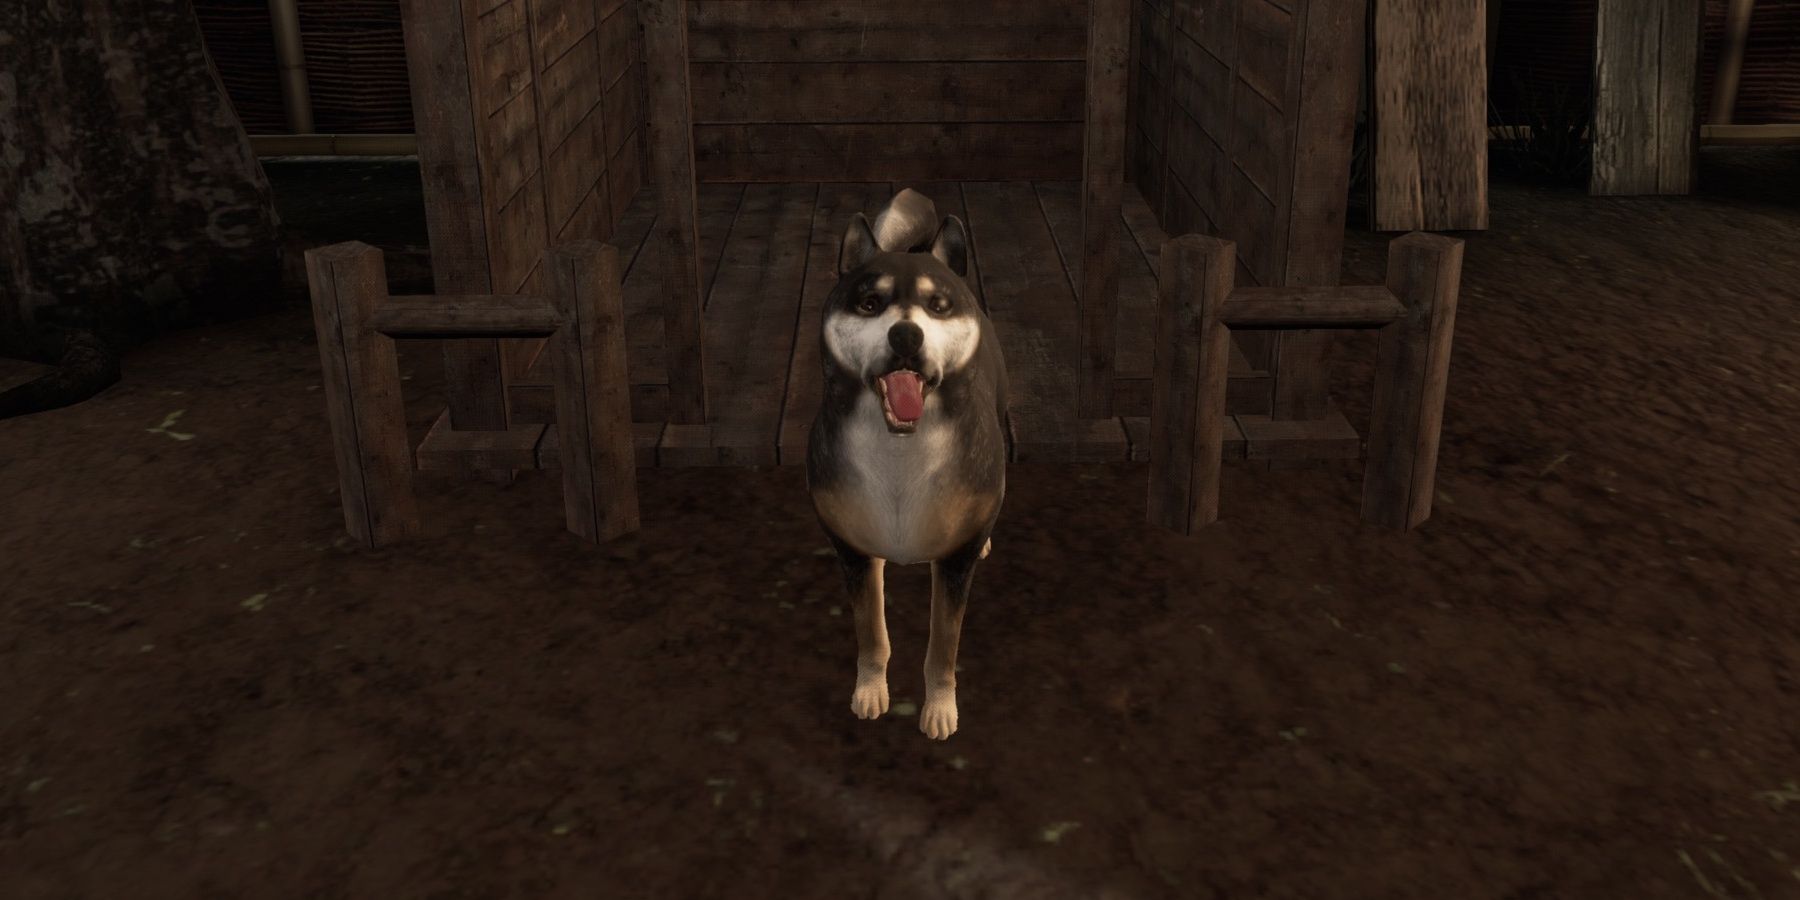 The Barking Dog stands outside the dog house at Ryoma's Villa.